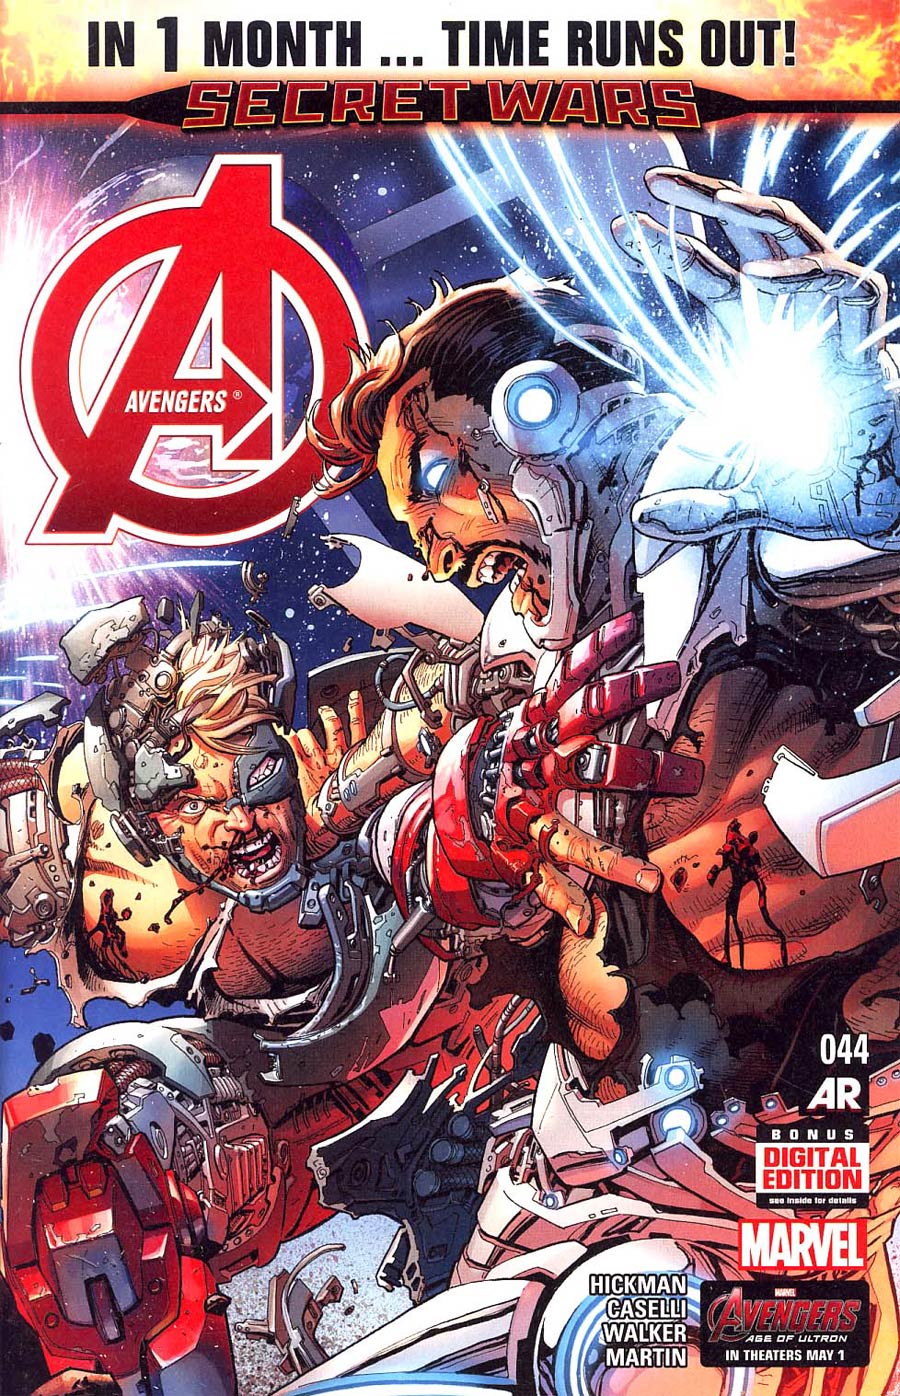 Avengers Vol 5 #44 Cover A Regular Dustin Weaver Cover (Time Runs Out Tie-In)